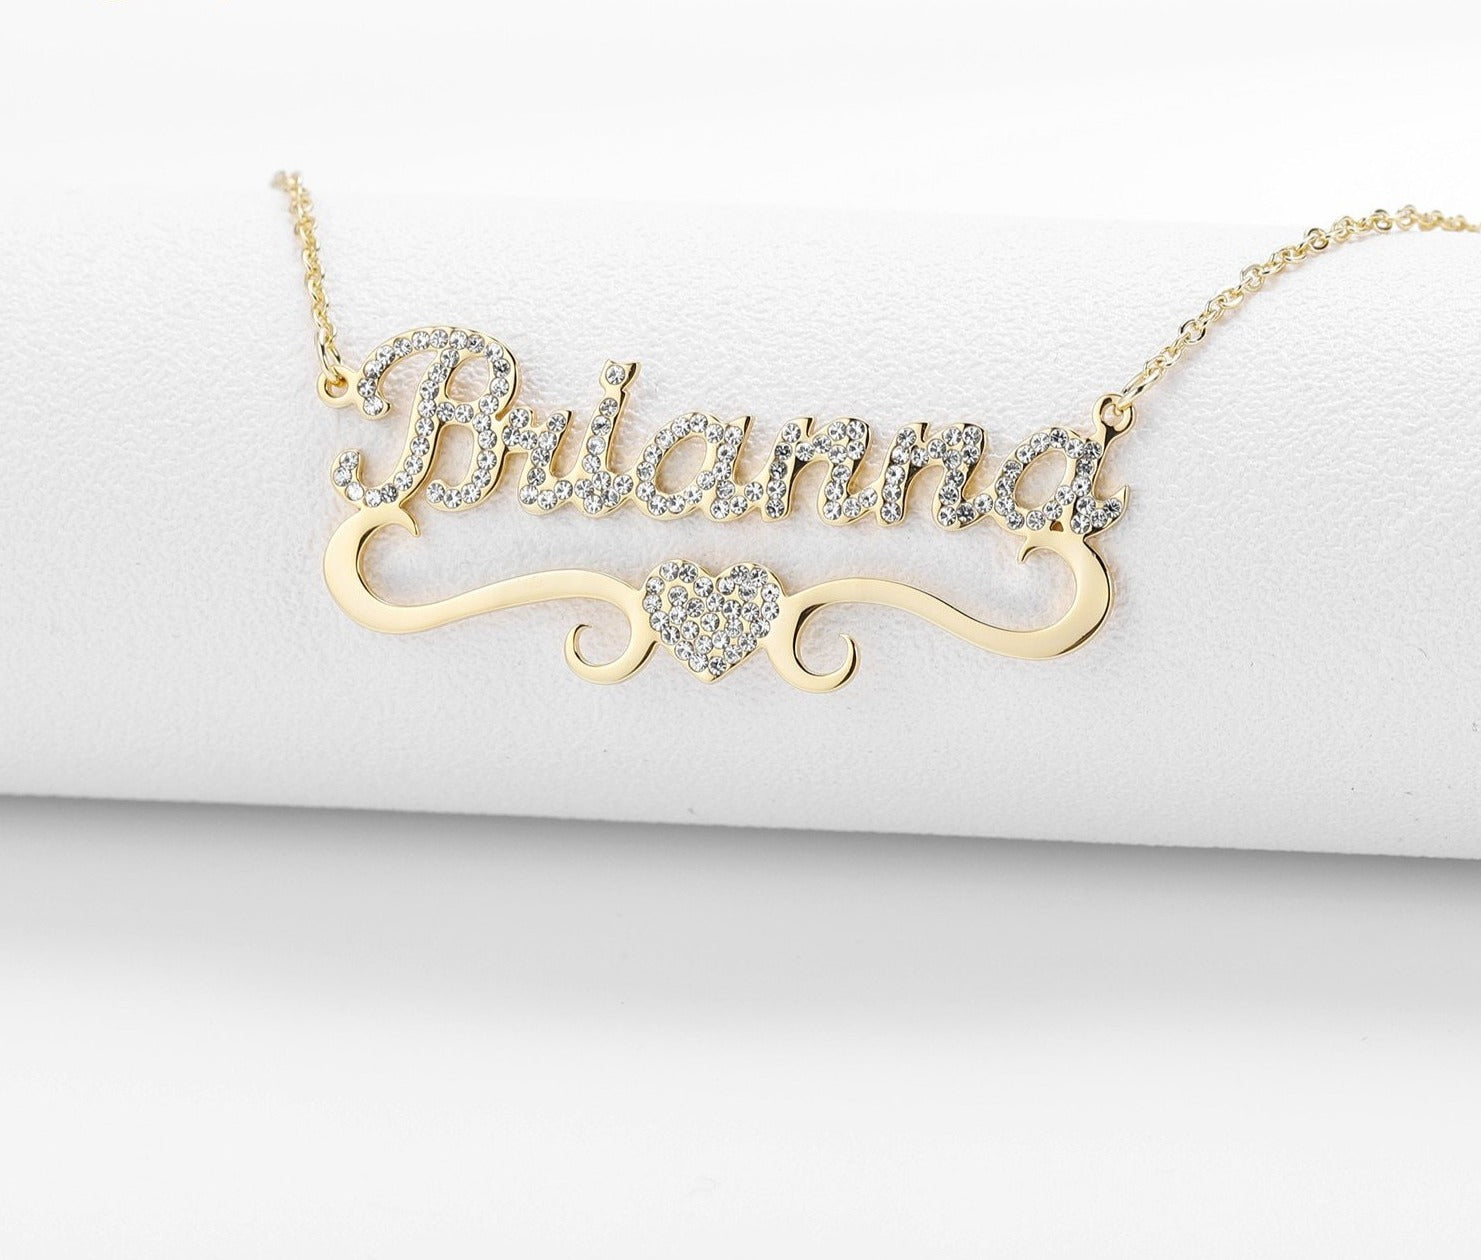 Cz Stone Heart Name Necklace